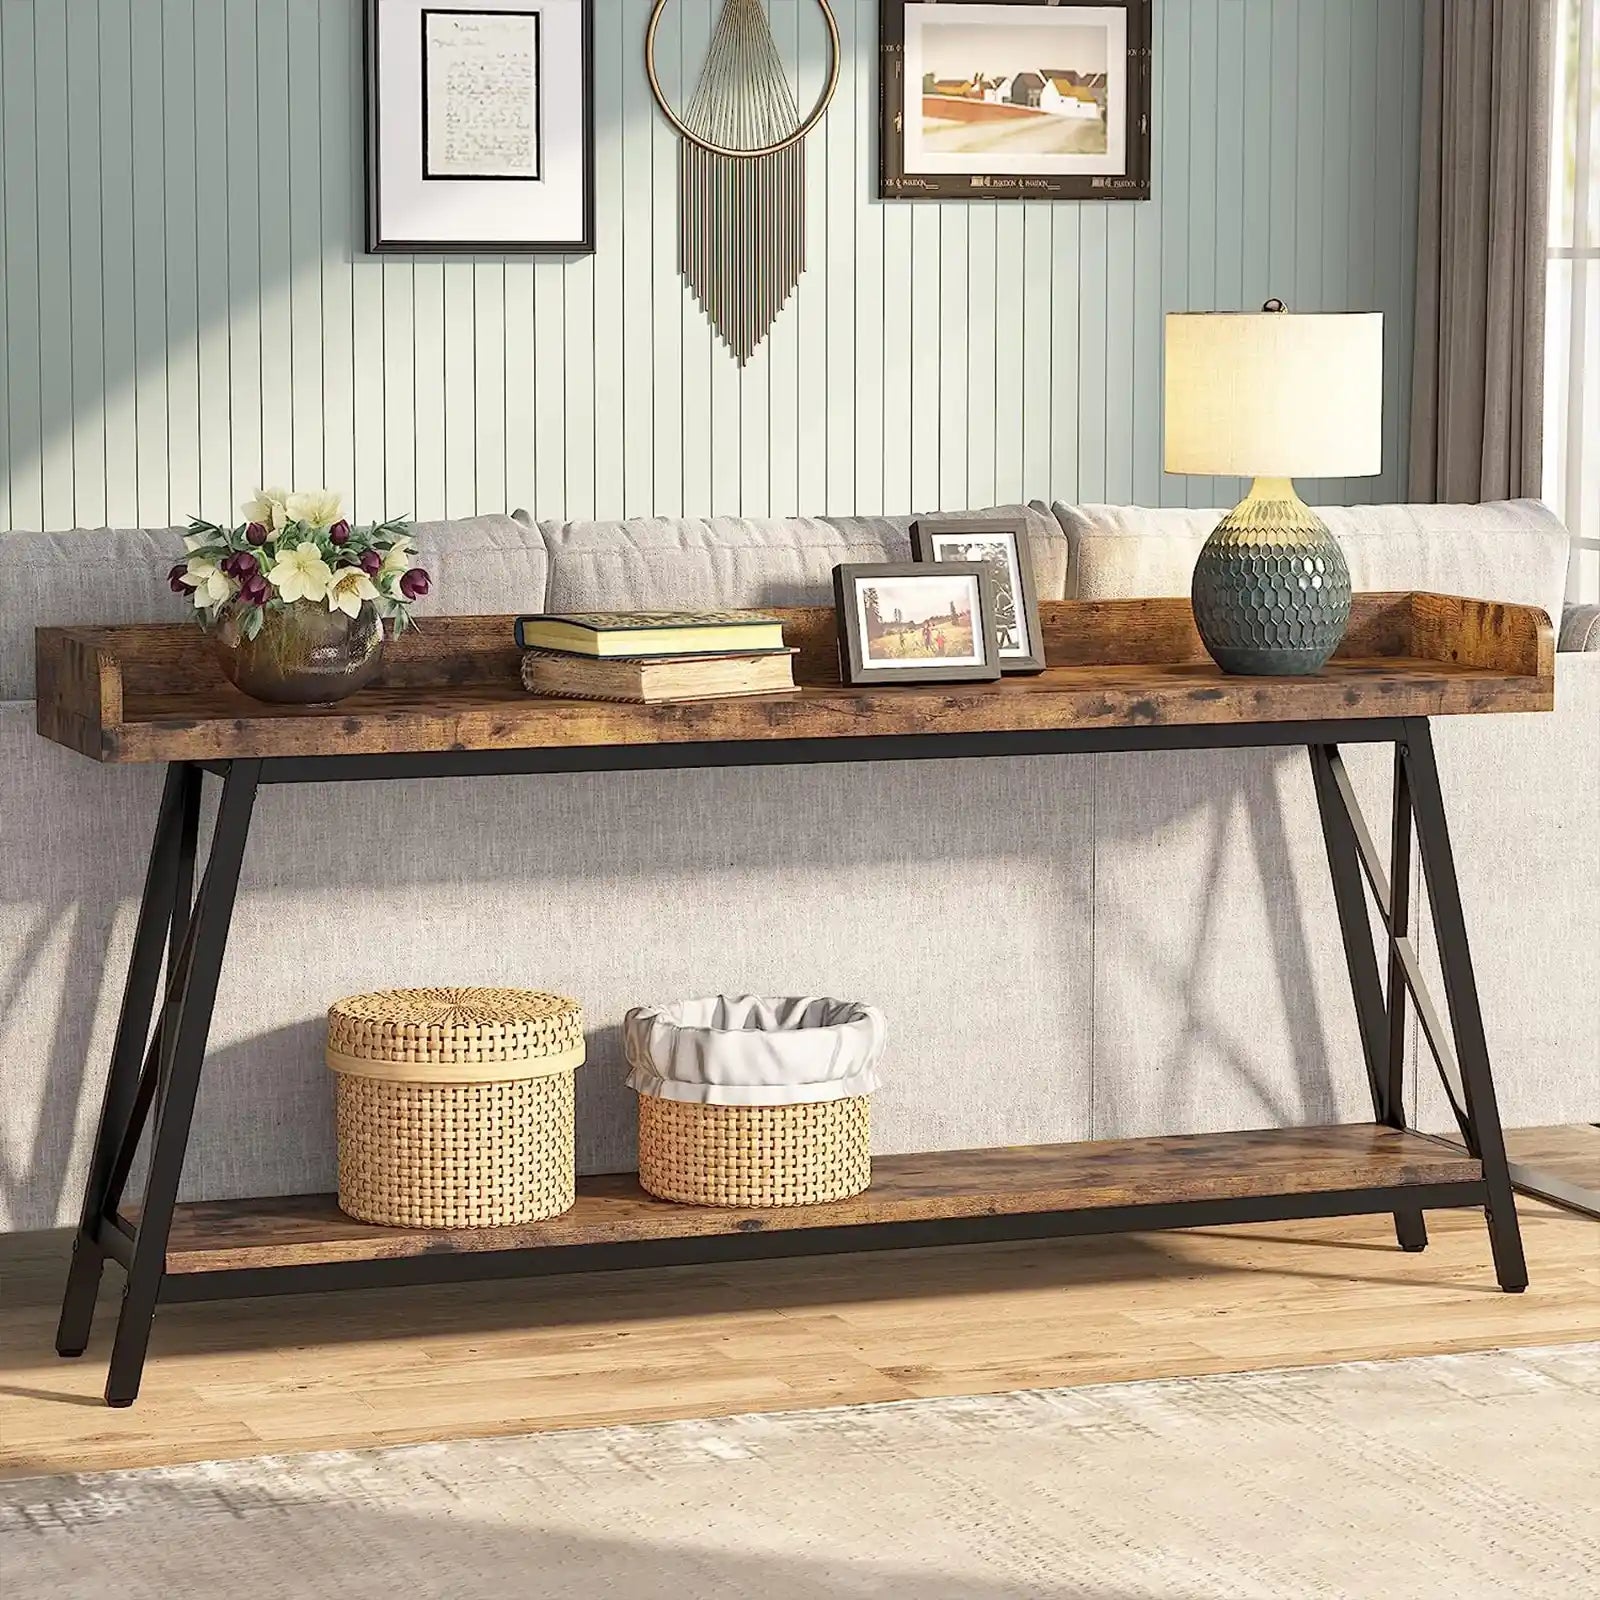 70.9 inch Extra Long Console Table Behind Couch, Rustic Industrial Sofa Table for Living Room, Narrow Entryway Hallway Long Bar Table